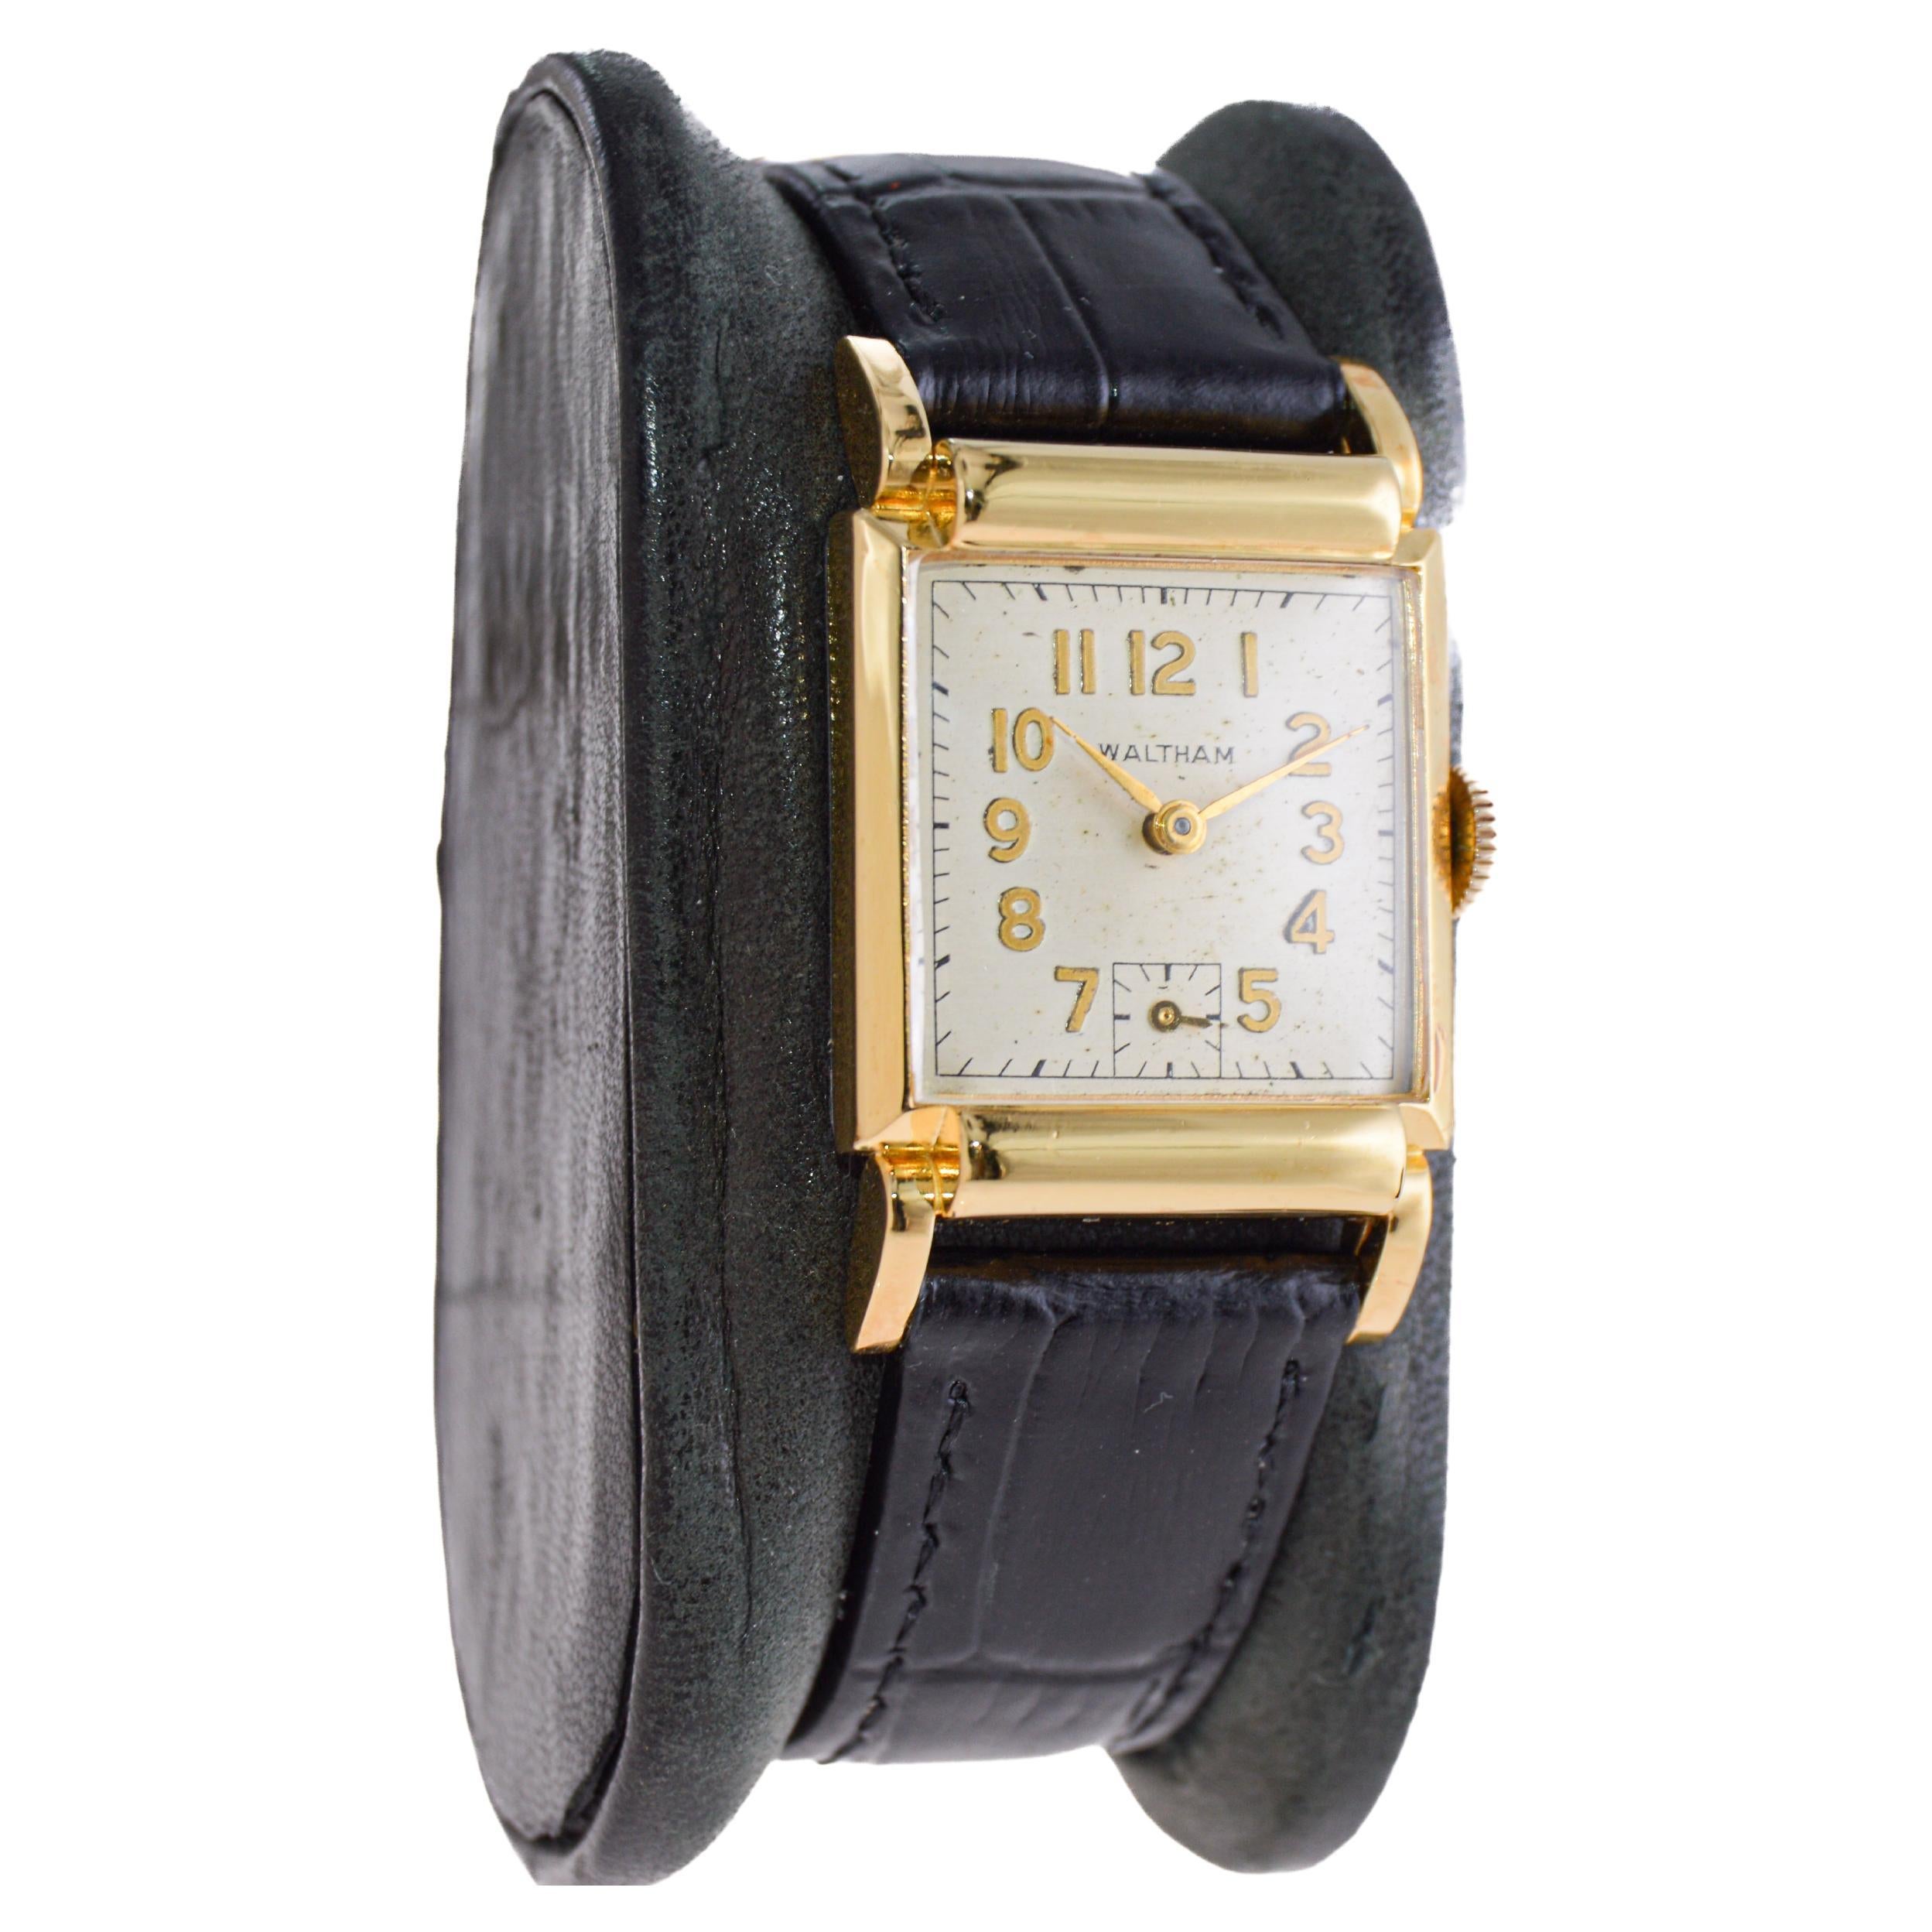 FACTORY / HOUSE: Waltham Watch Company
STYLE / REFERENCE: Art Deco / Tank Style
METAL / MATERIAL: Yellow Gold-Filled
CIRCA / YEAR: 1940's
DIMENSIONS / SIZE: Length 36mm X Width 23mm
MOVEMENT / CALIBER: Manual Winding / 19 Jewels / Caliber 750
DIAL /